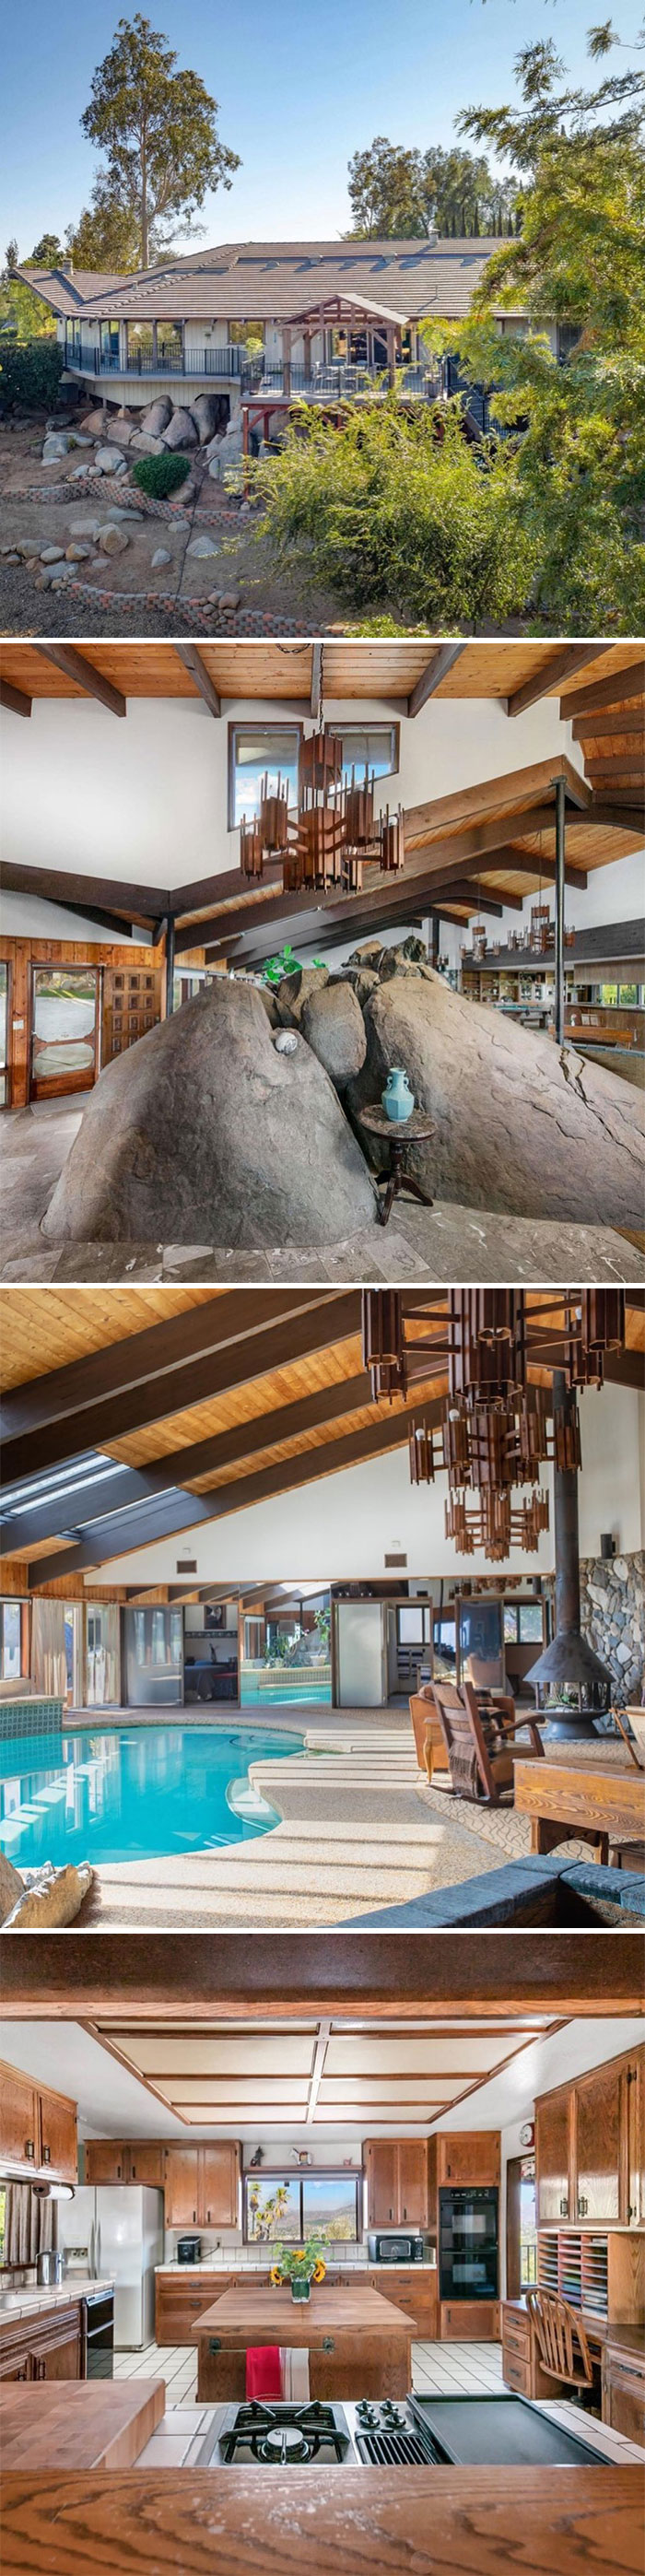 This Escondido, Ca Home Has One Of The Most Amazing Indoor Pool Spaces We’ve Ever Seen. Per The Listing, Original Owner/Builder, Robert Hamson, “Made History When He Blasted Out Boulders To Build His "Dream House On The Hill" In 1975. Currently Listed For $1,645,000. 5 Bd, 5 Ba. 5,828 Sq Ft. 1.31 Acres